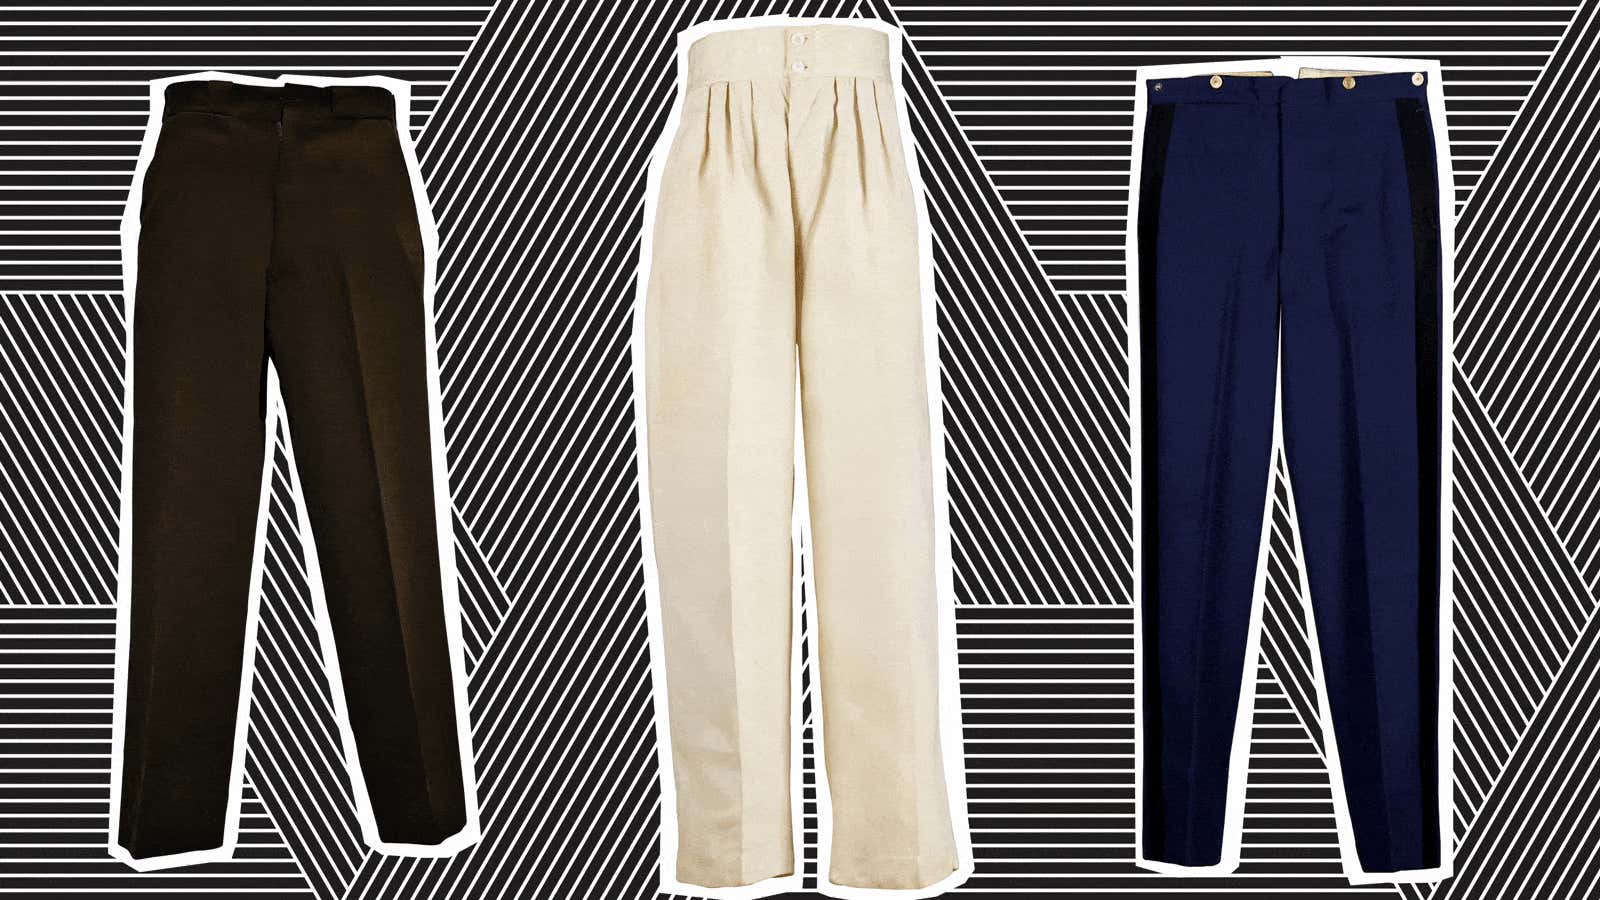 A Brief History of Trousers